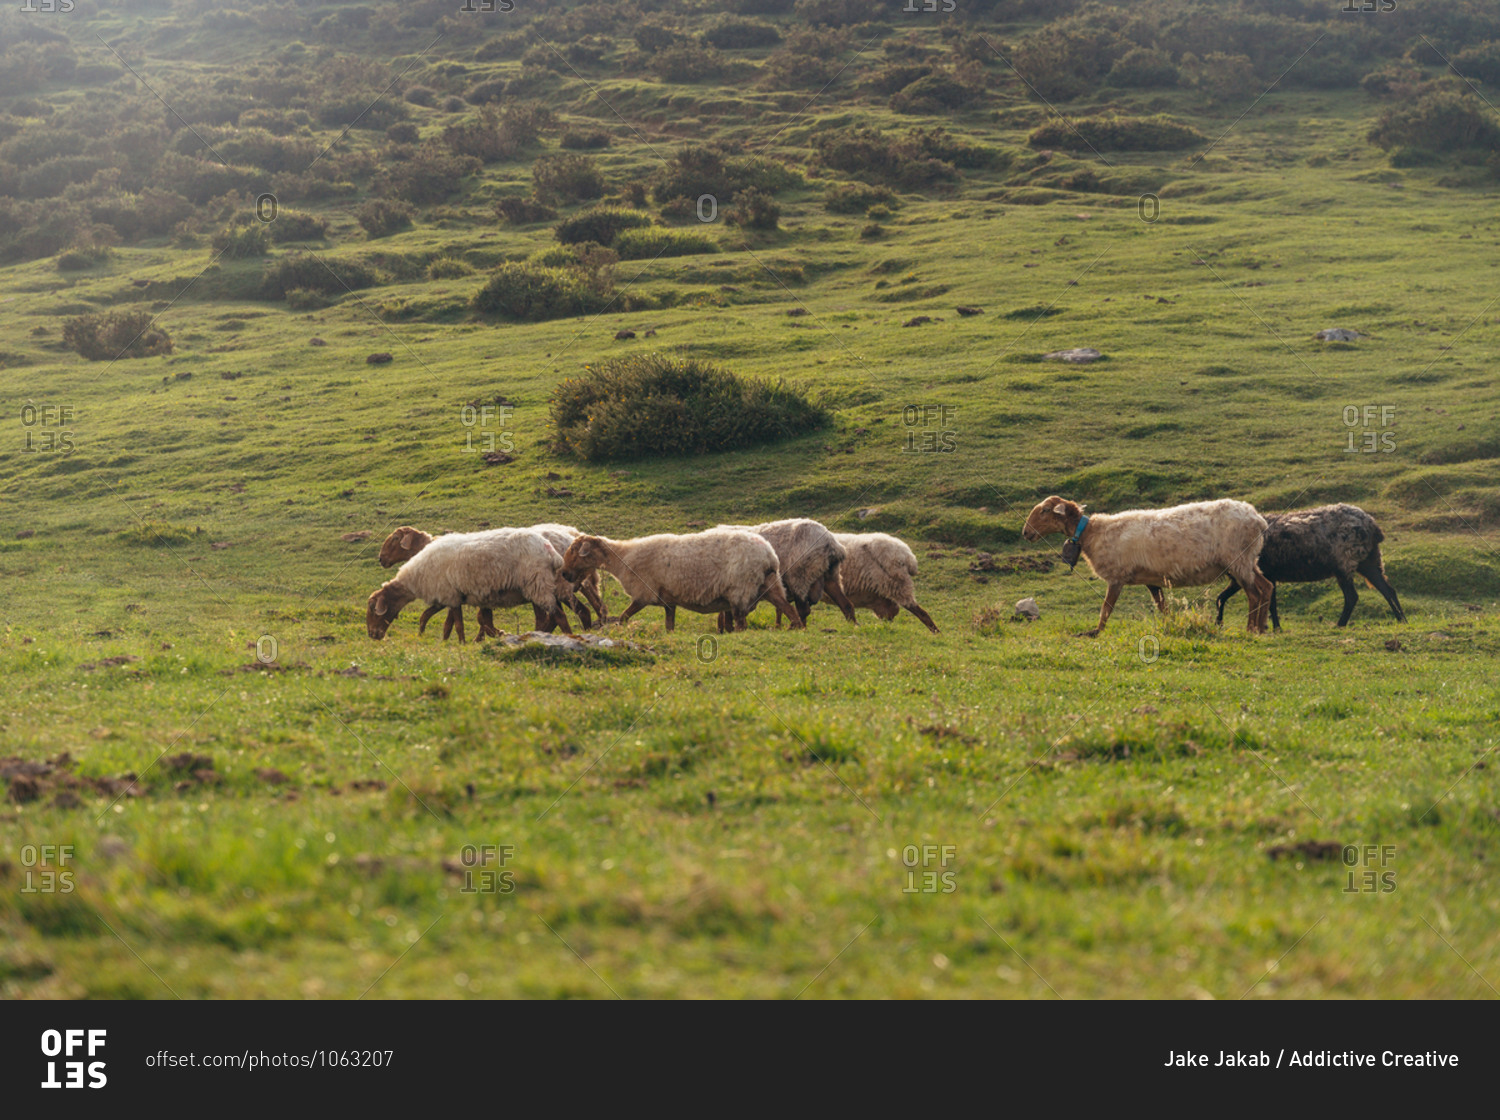 Herd of cute sheep walking and grazing on lush grassy meadow in summer countryside